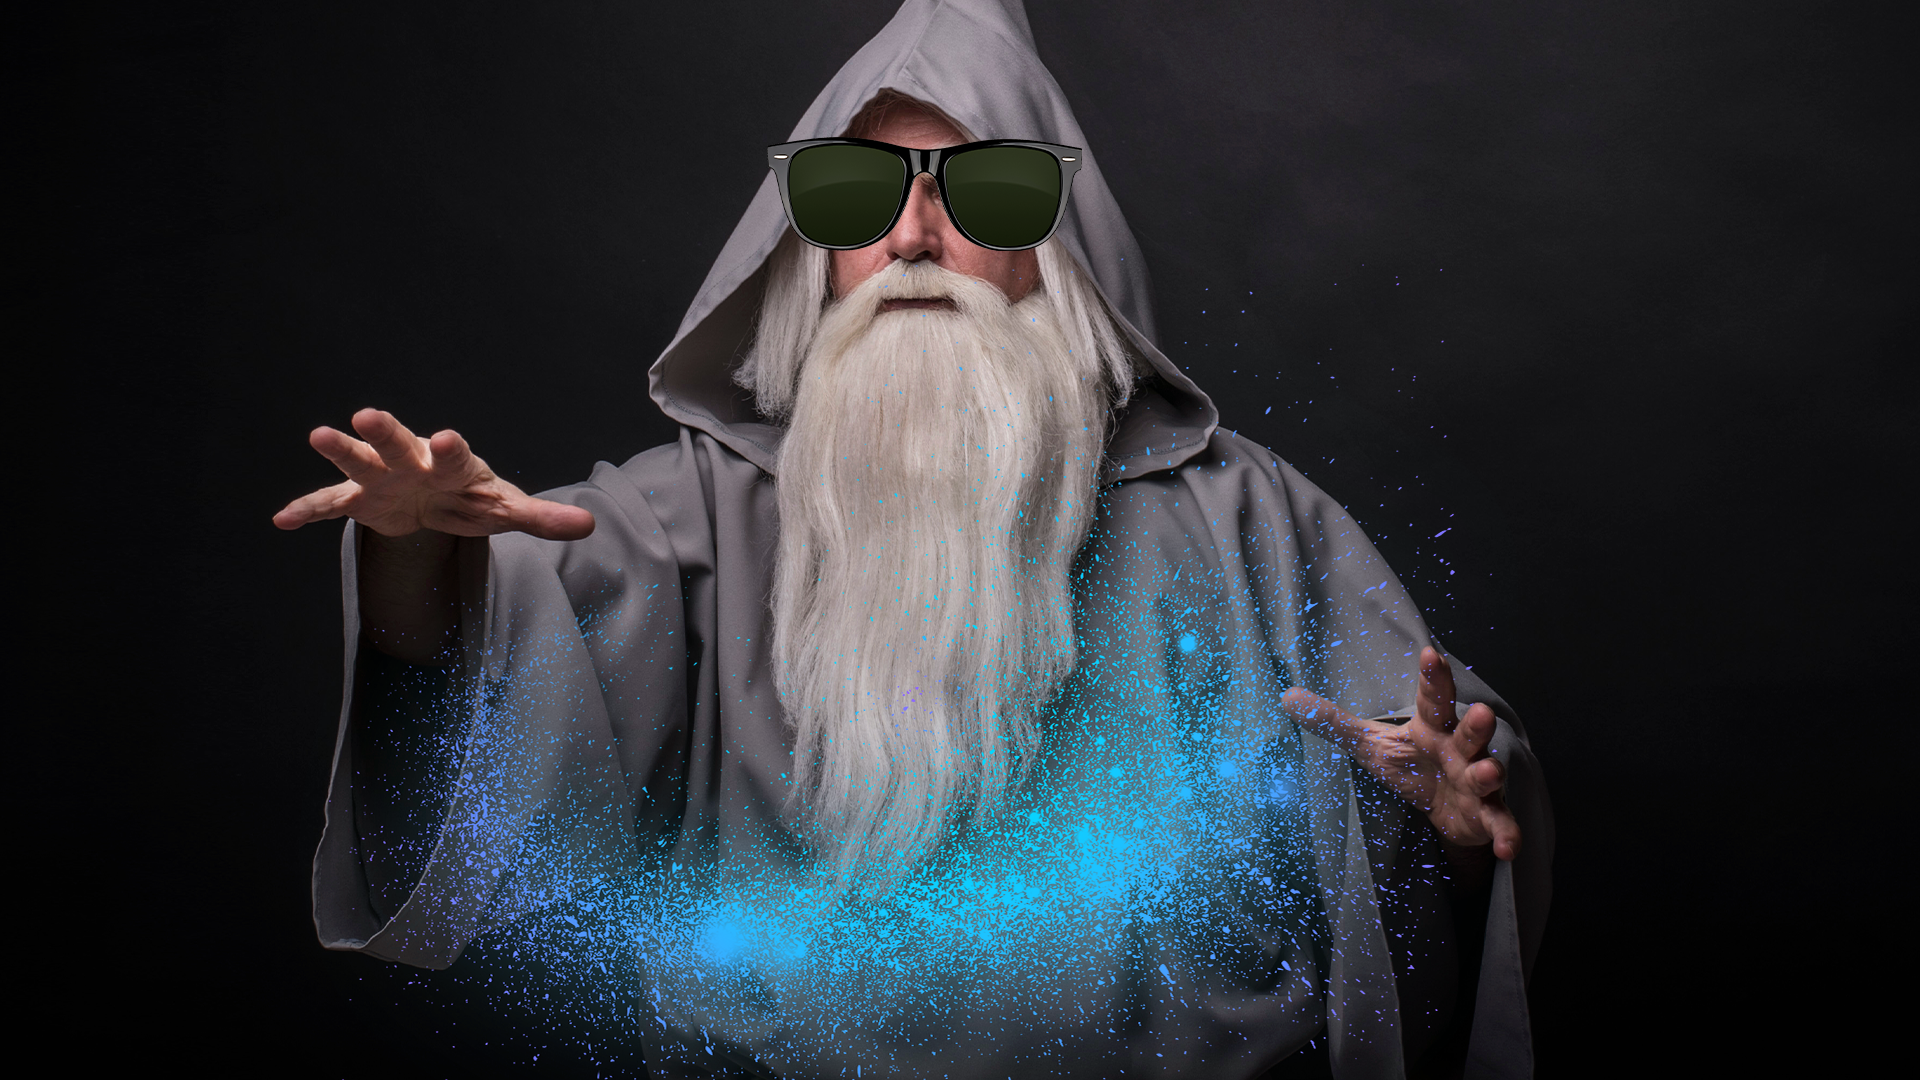 Wizard casting a spell